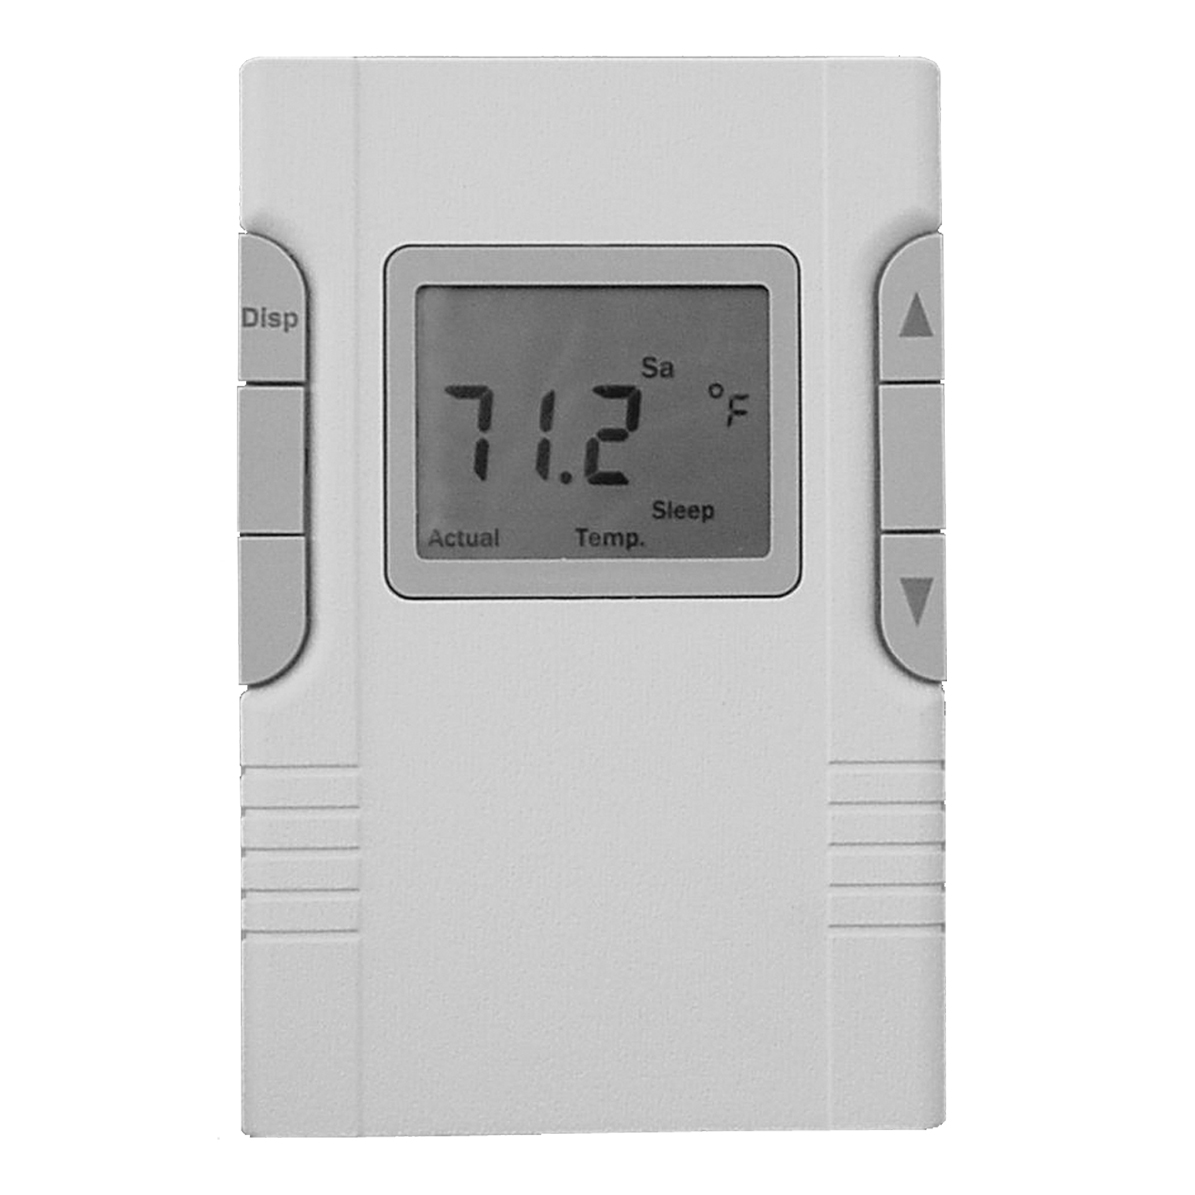 https://king-electric.com/wp-content/uploads/2018/07/HBP_Hydronic_Thermostat_MAIN-1.jpg